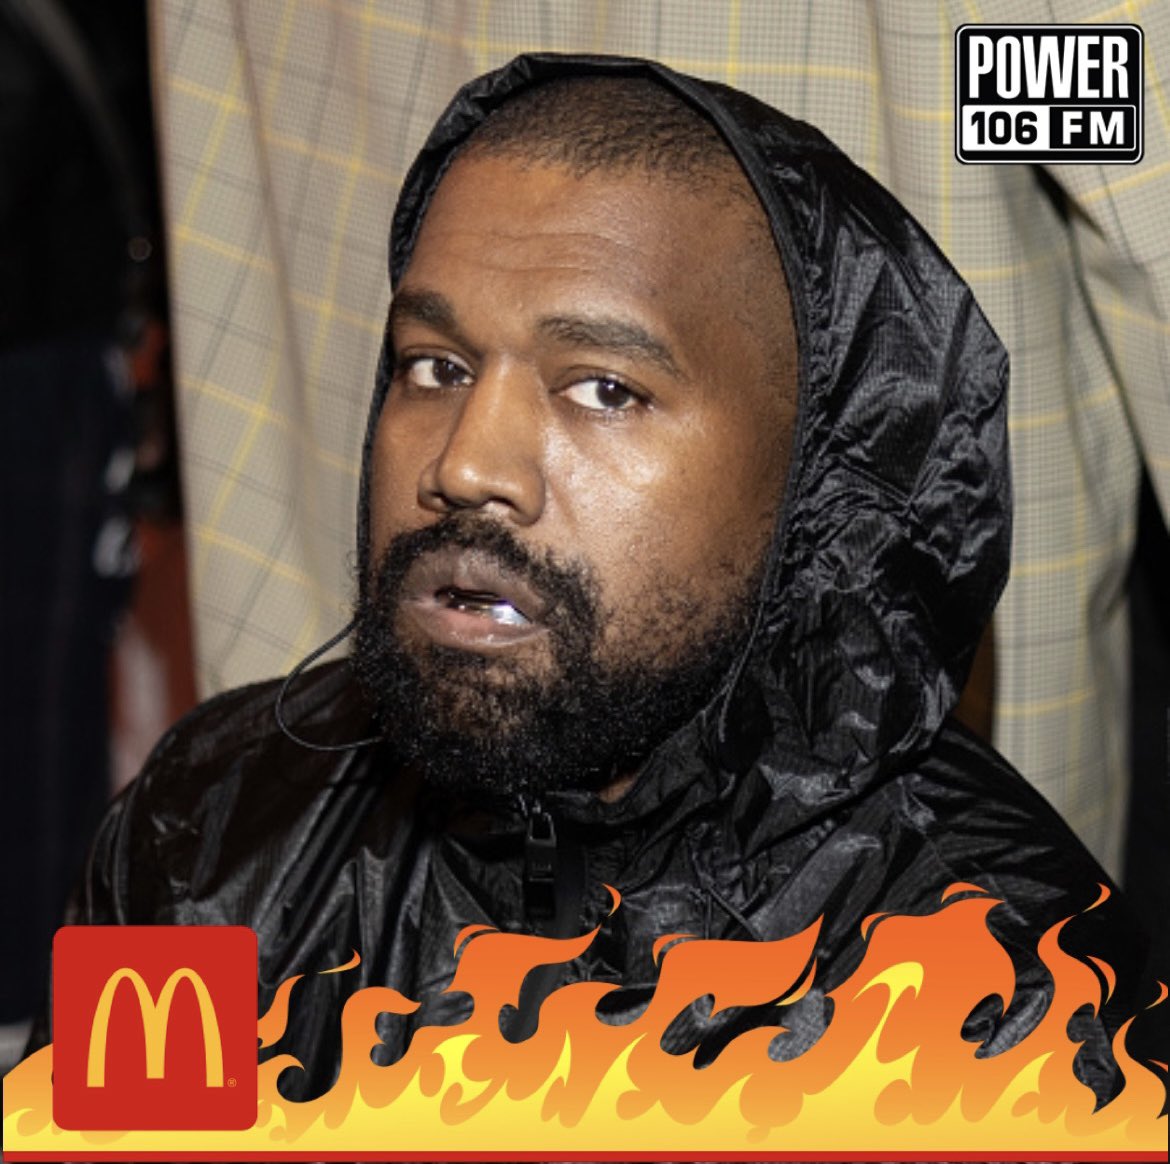 Hip Hop is all about bringing the heat! Power 106 and McDonald’s salute the hottest in Hip Hop for their contributions. Today we salute #Ye! McDonald’s is also turning up the heat with their Spicy McNuggets with aged cayenne and chili pepper, it’s a must try!